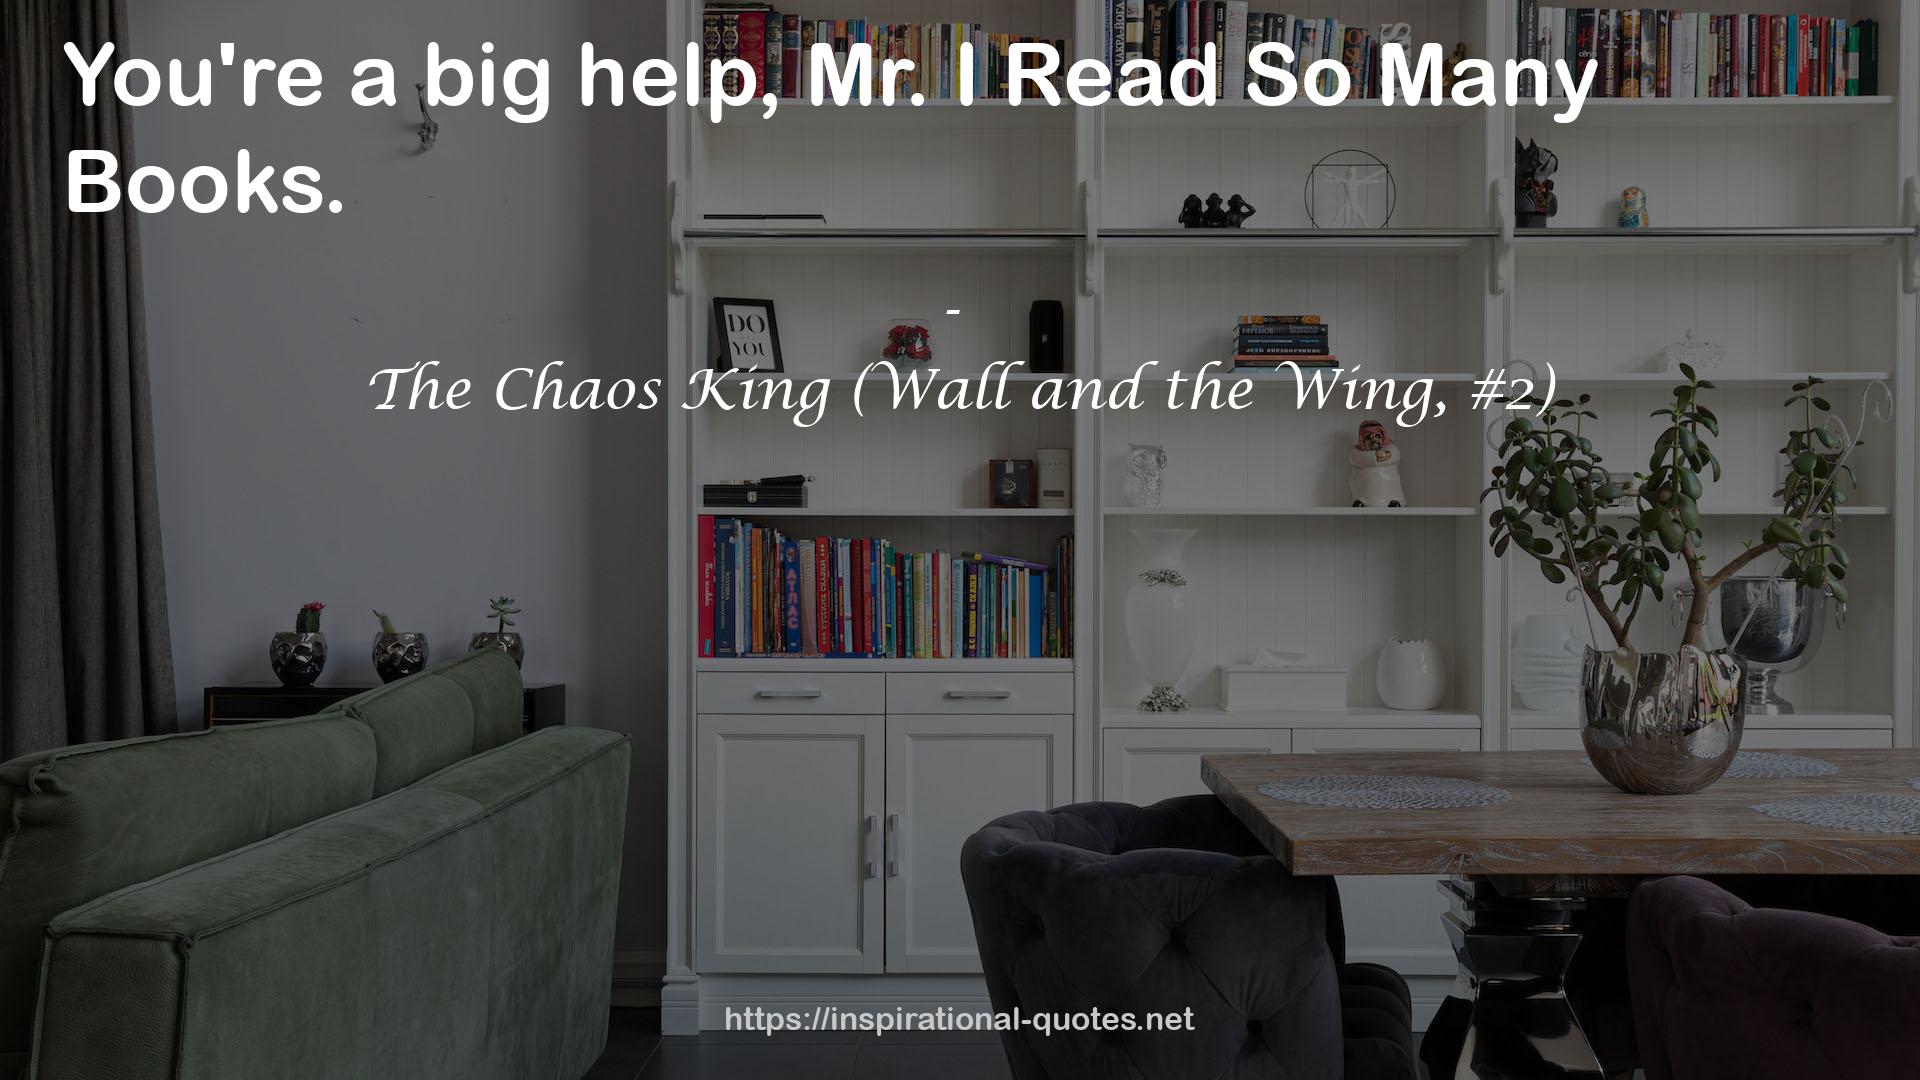 The Chaos King (Wall and the Wing, #2) QUOTES